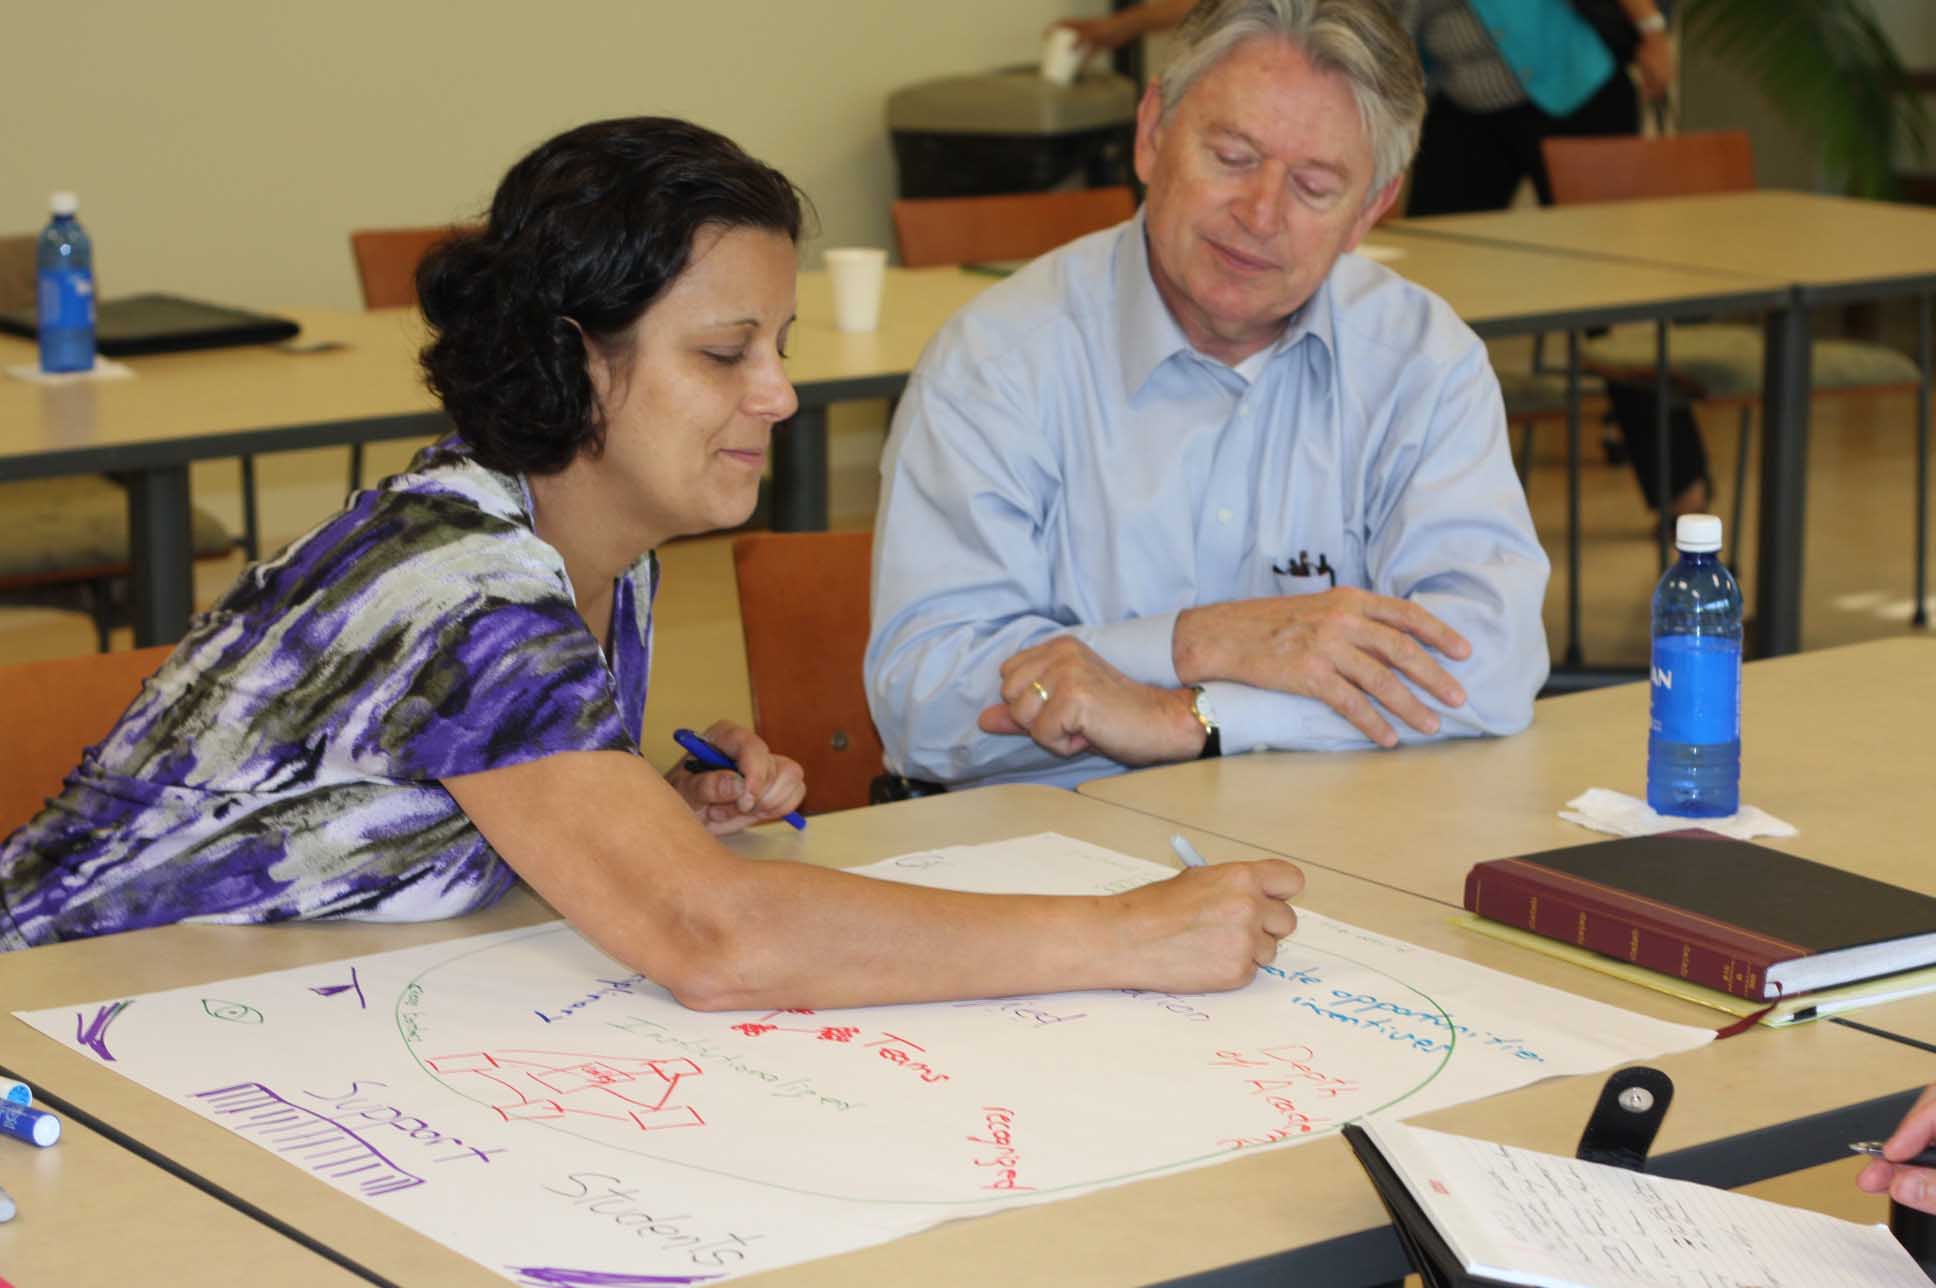 Maria Navarro, associate professor in the Department of Agricultural Leadership, Education and Communication, works with Josef Broder, associate dean for academic affairs for the UGA College of Agricultural and Environmental Sciences, at a Office of Global Programs visioning meeting in June 2014.